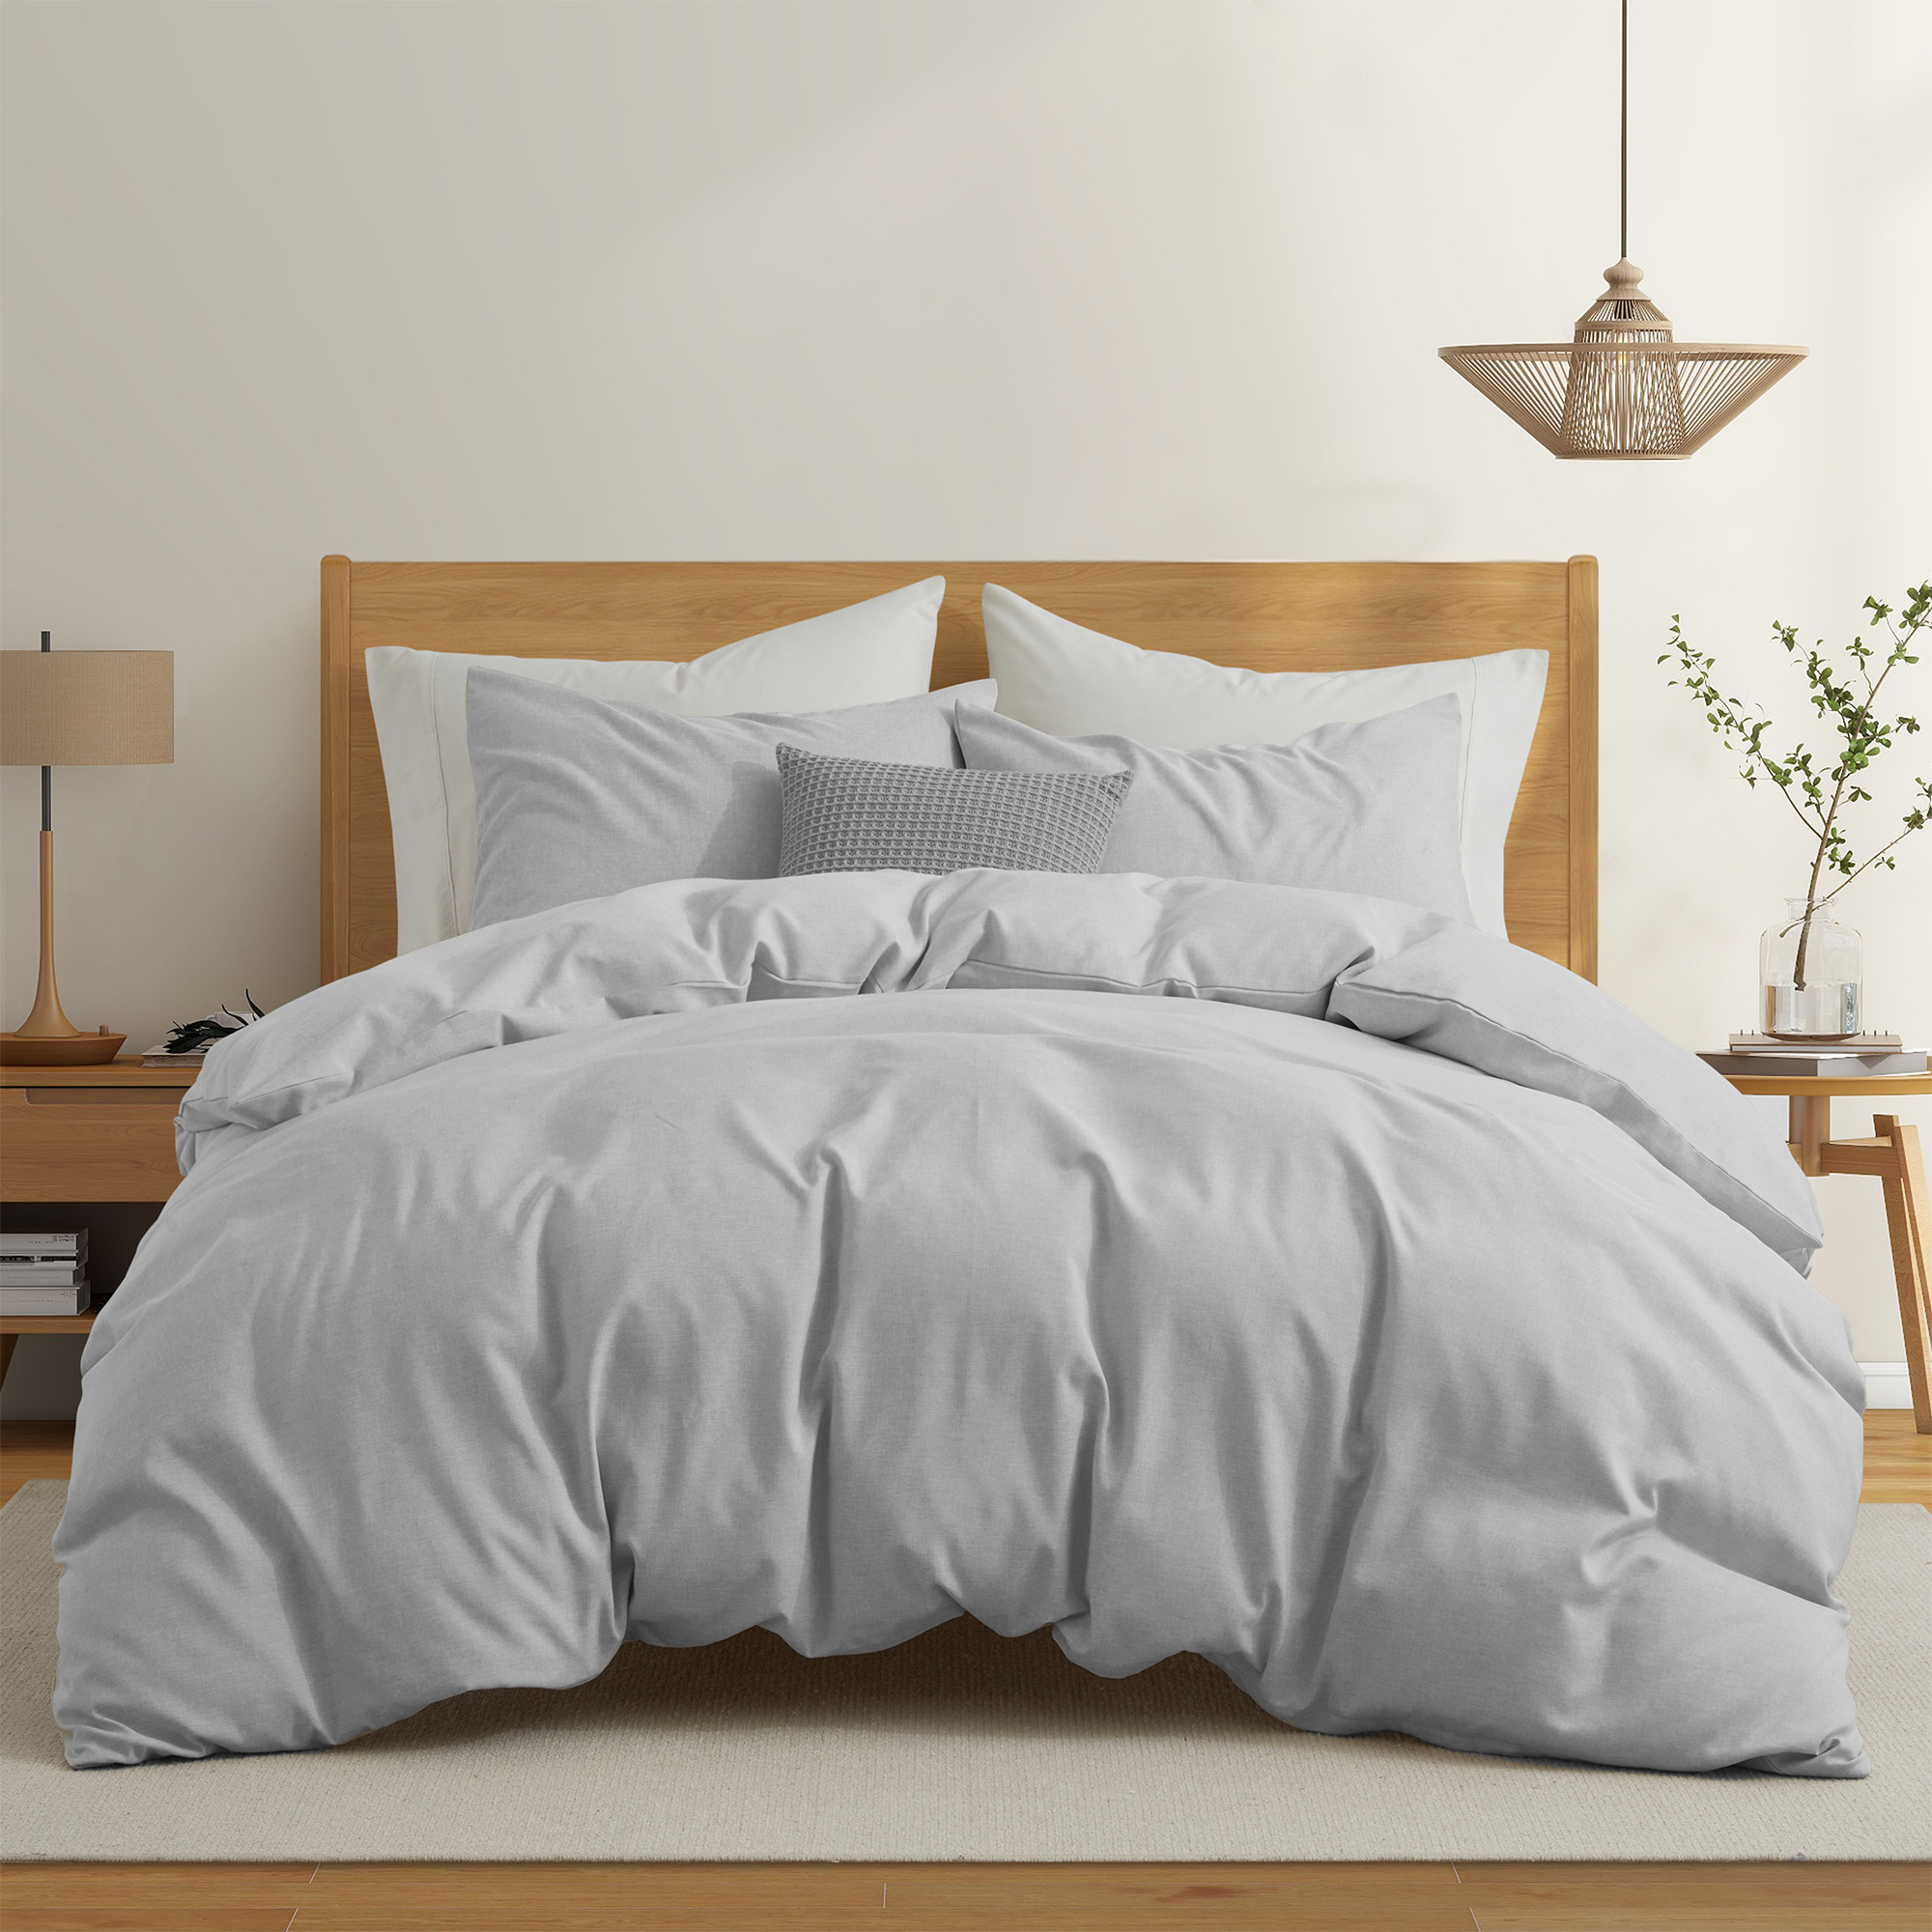 Solid Faux Linen Duvet Cover Set With Shams - Luxurious Comfort - Gray, King-90x106